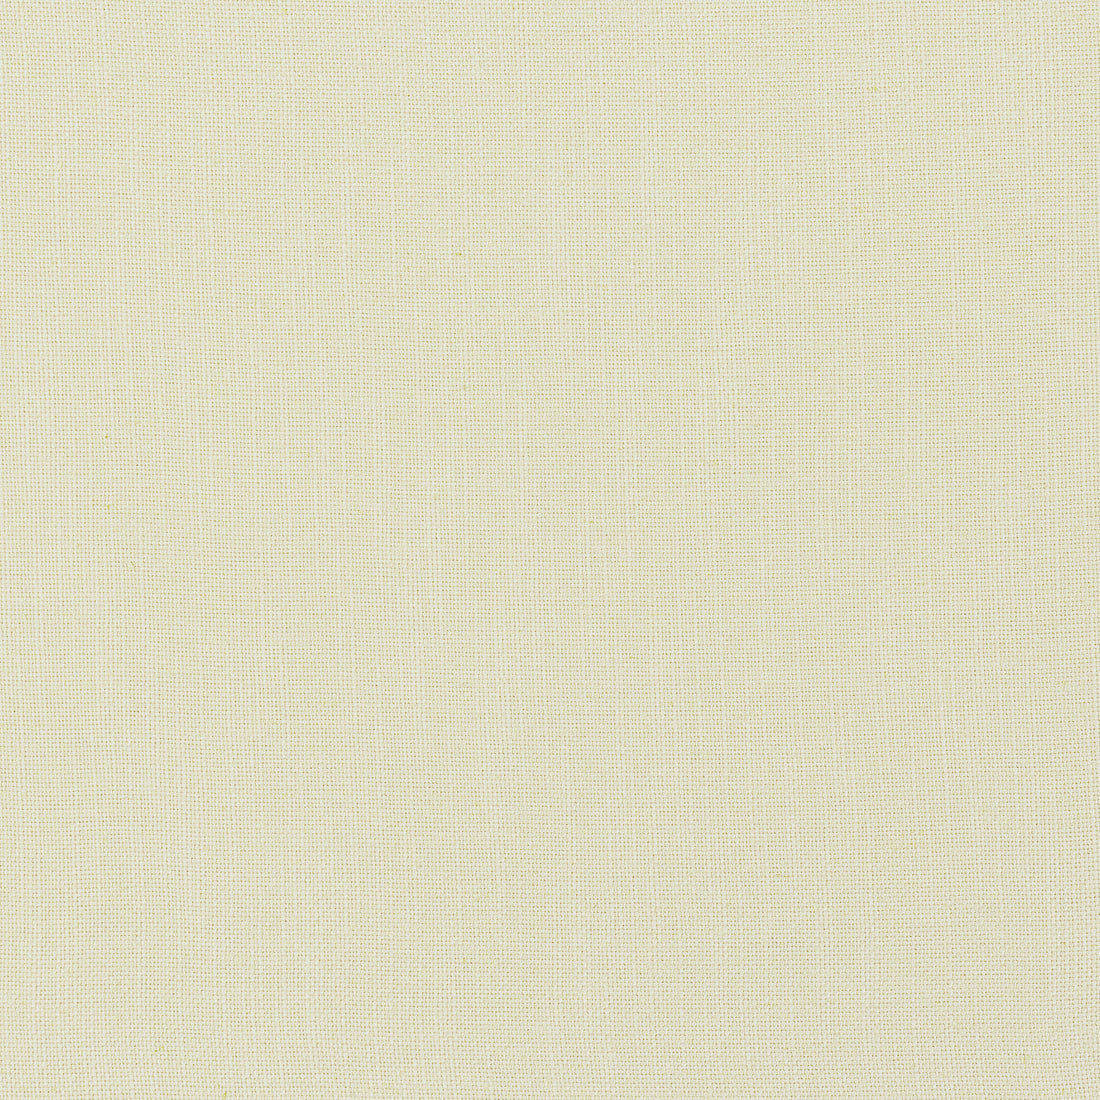 Palisade Linen fabric in green tea color - pattern number FWW7656 - by Thibaut in the Palisades collection